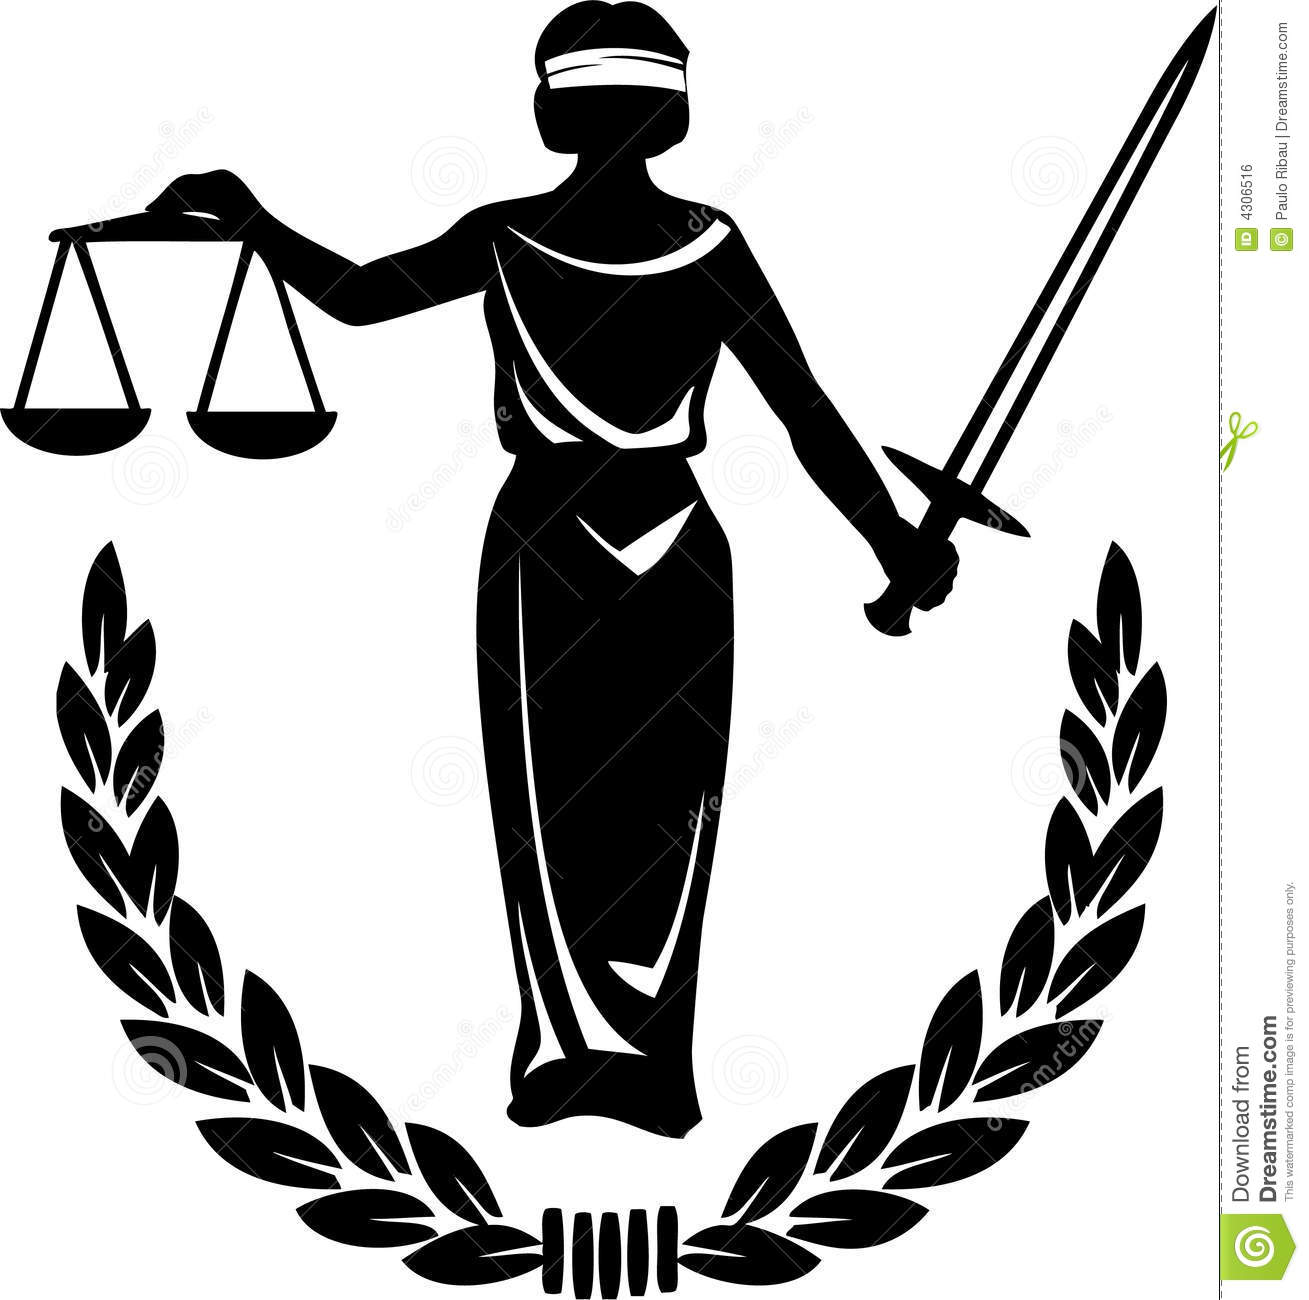 Image result for justice free image